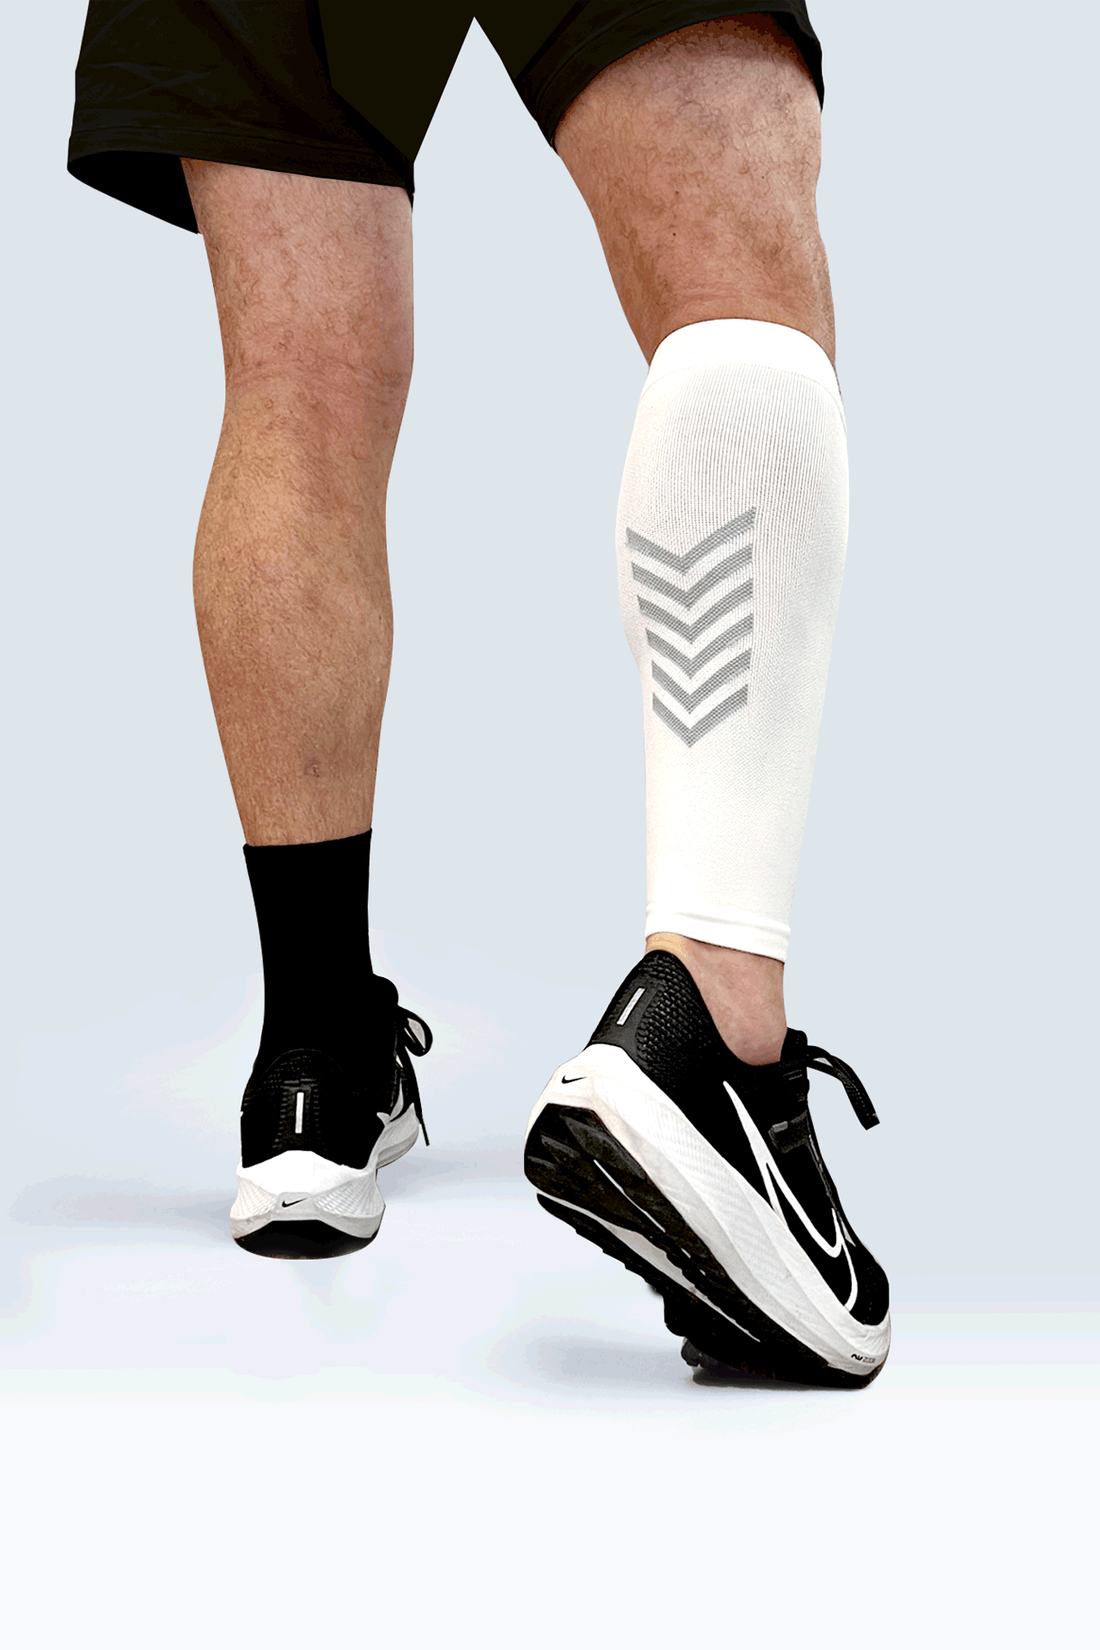 BASE Compression Calf Sleeve (Pair) - White